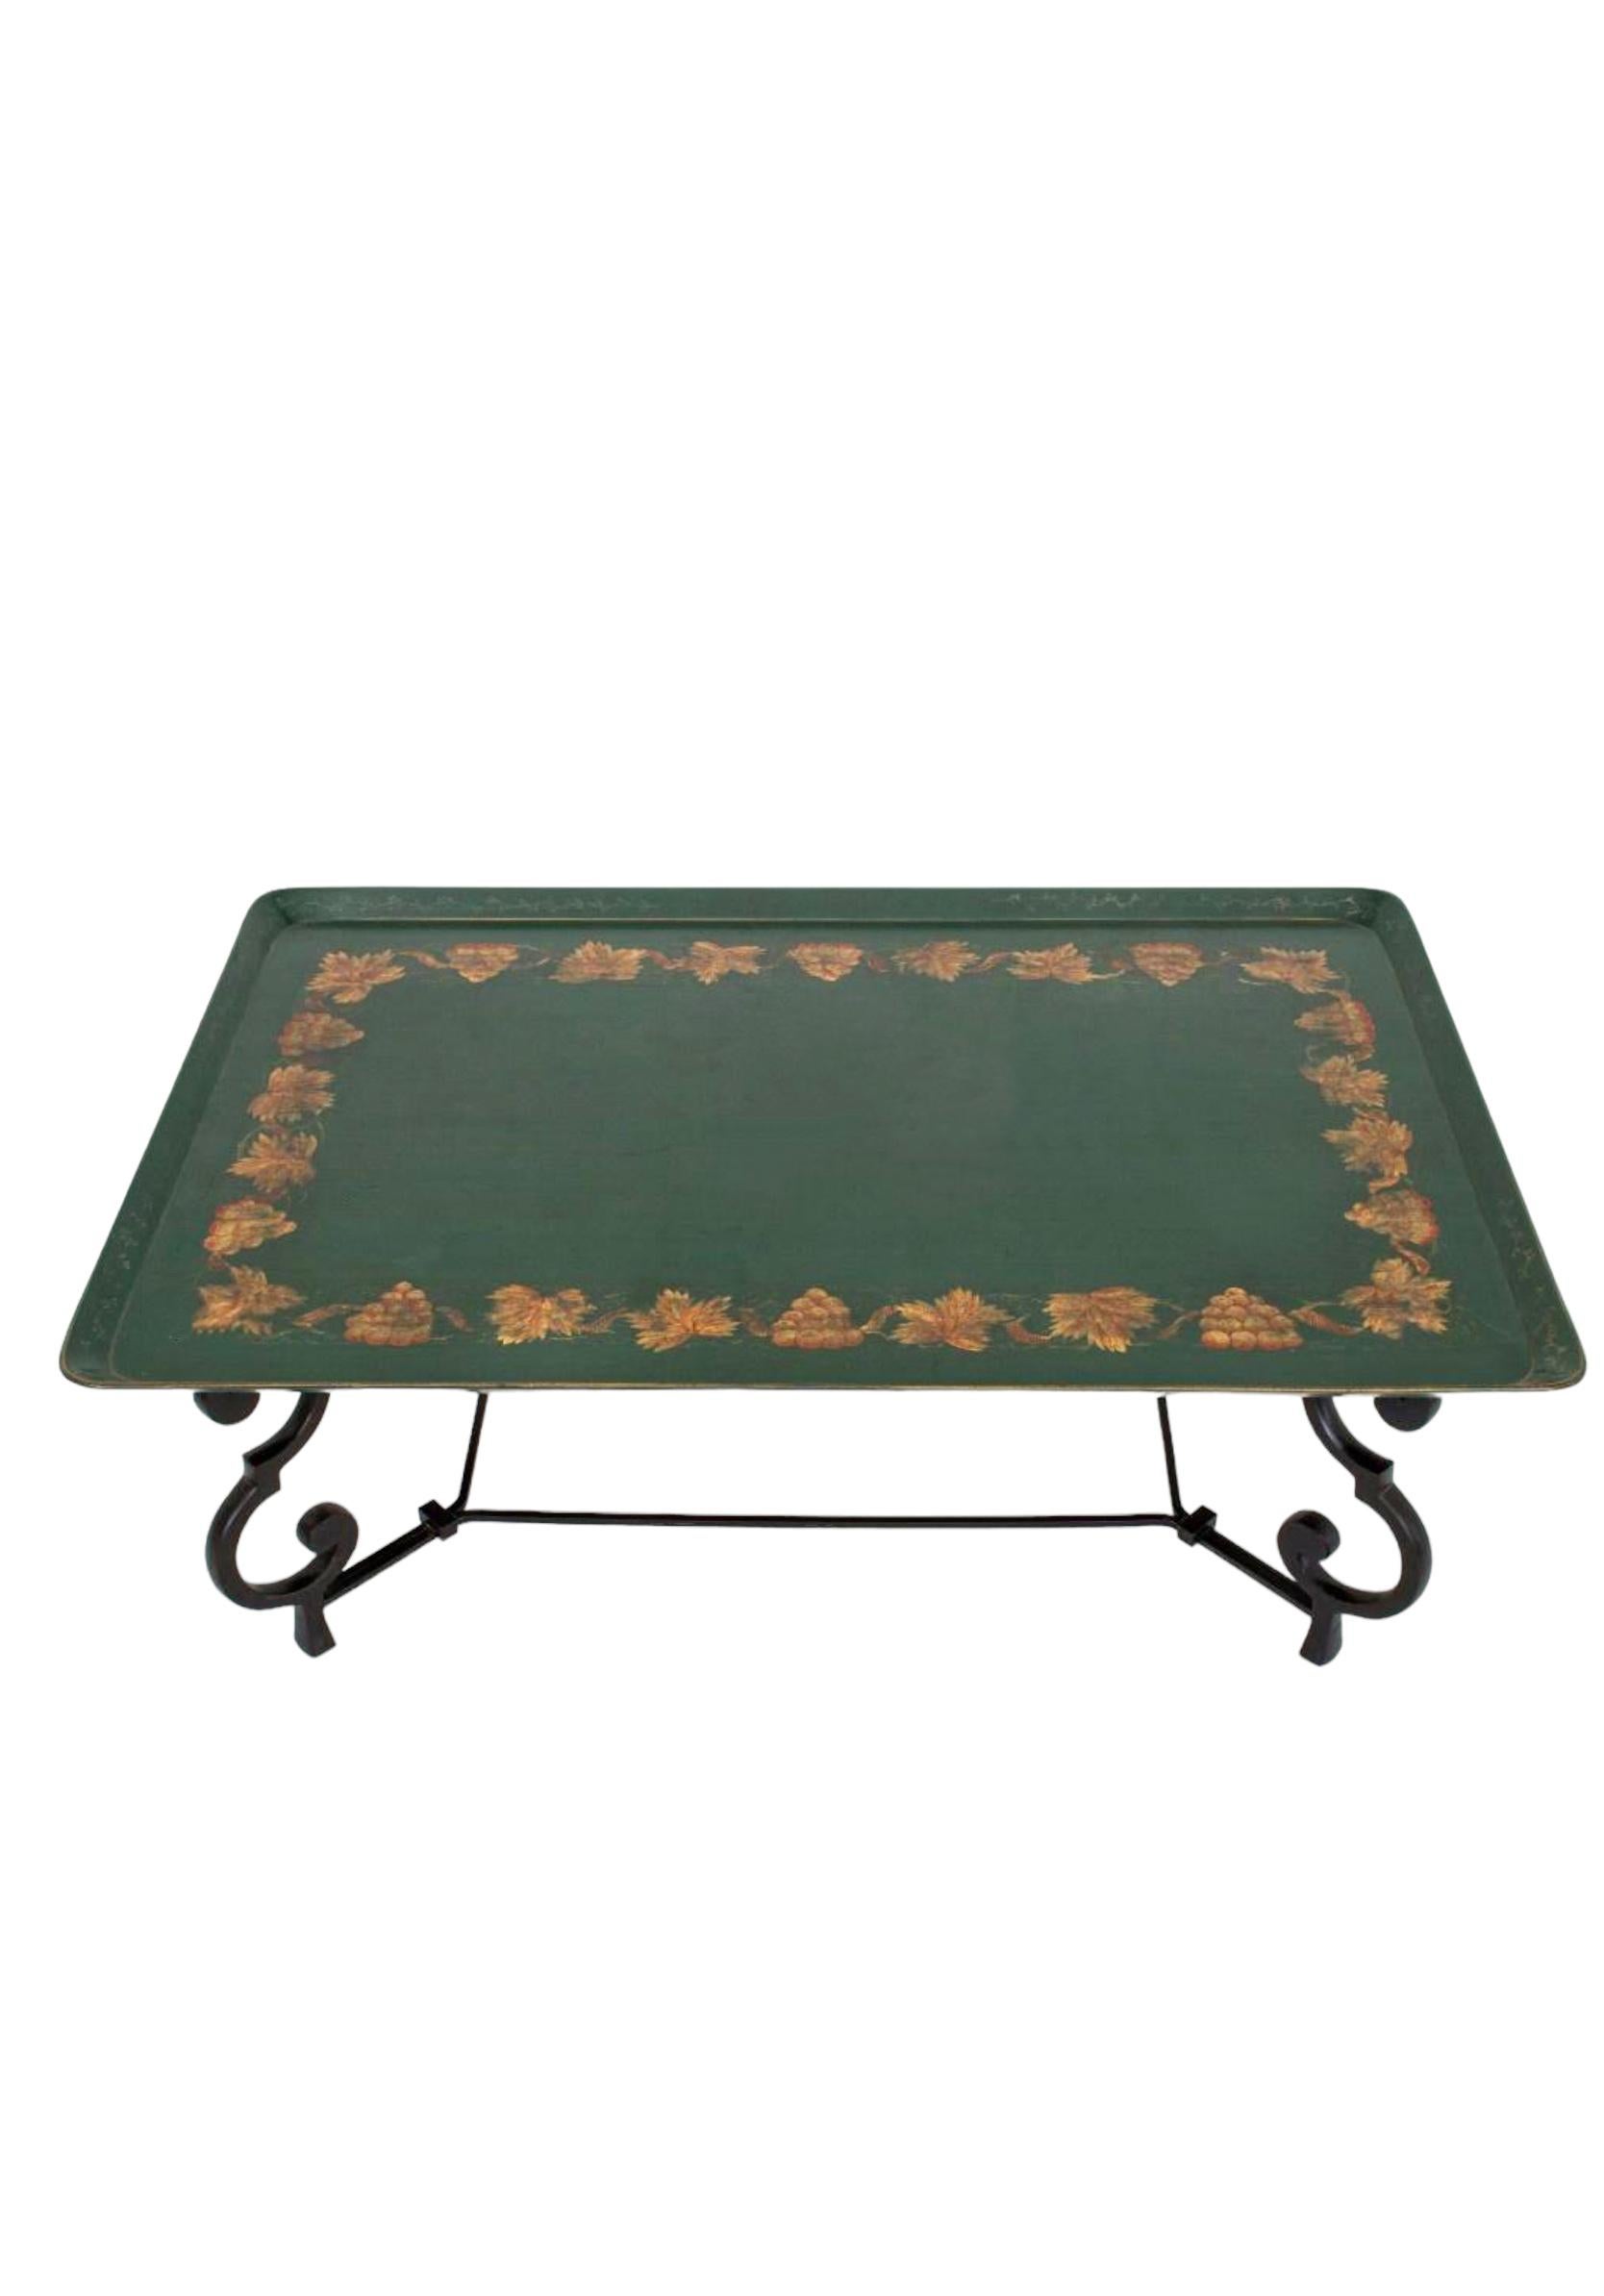 Rustic Mid-Century French Maison Ramsay Painted Tole Style Wood / Iron Coffee Table  For Sale